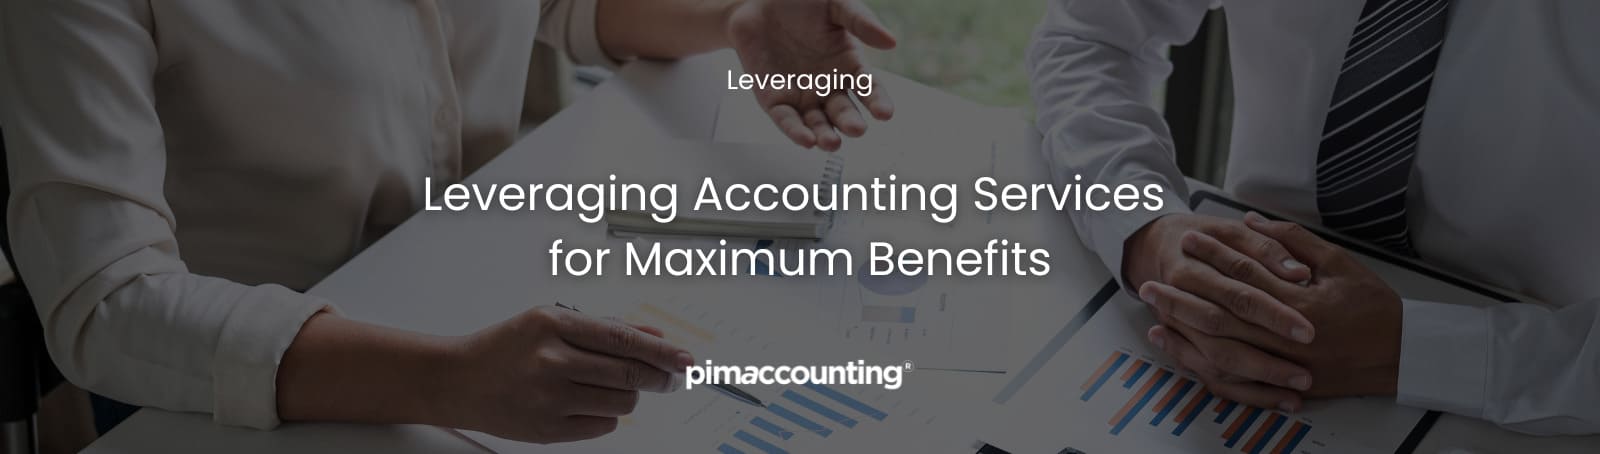  Leveraging Accounting Services for Maximum Benefits